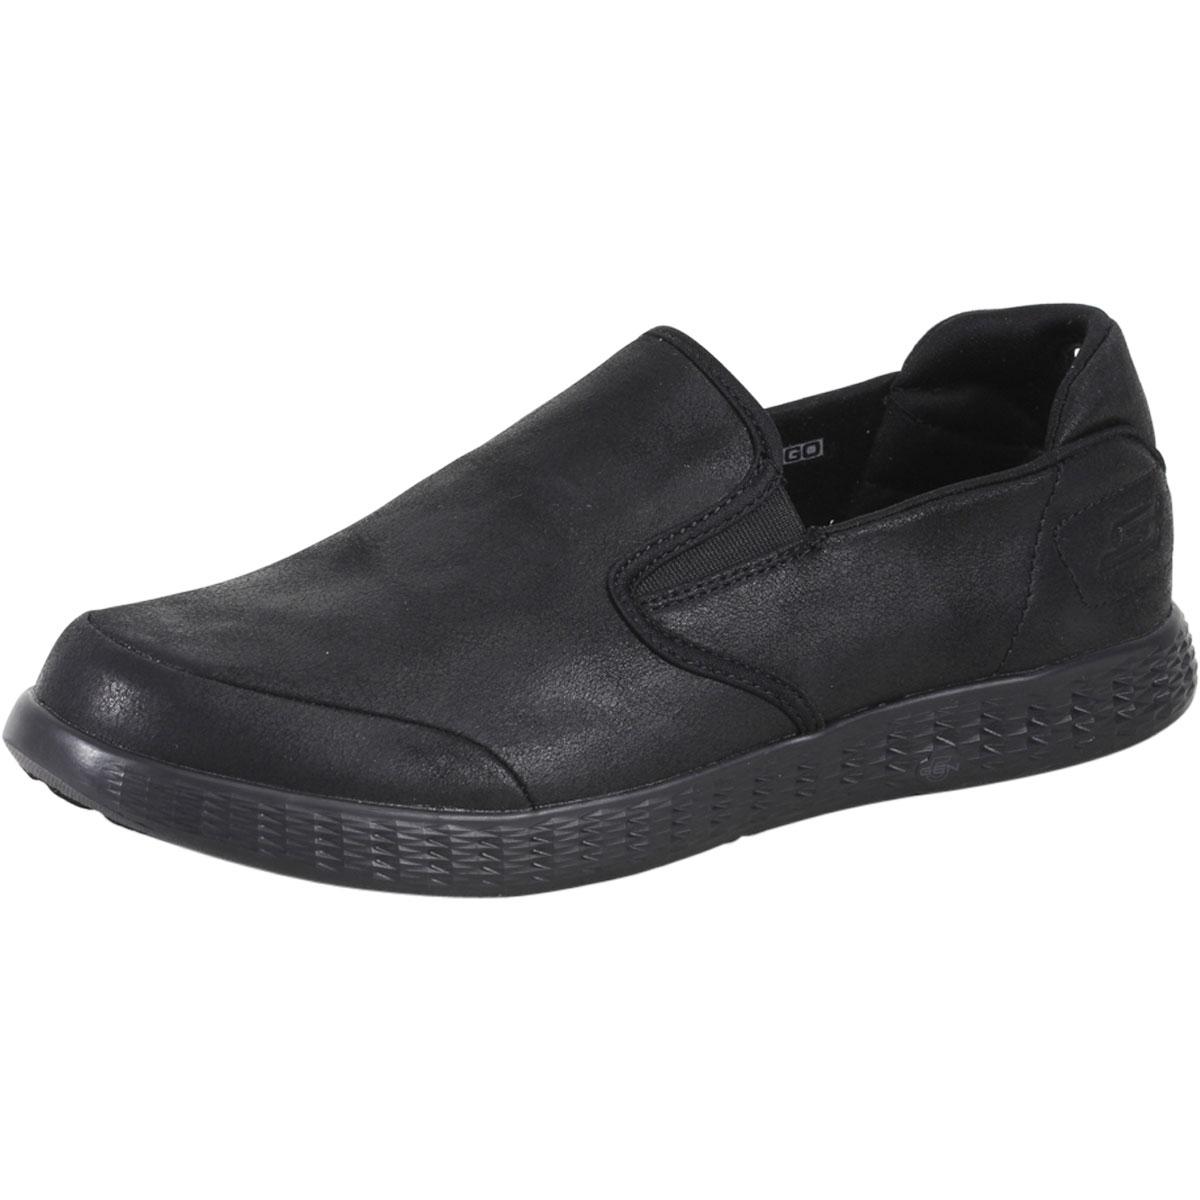 GO Glide Surpass Loafers Shoes